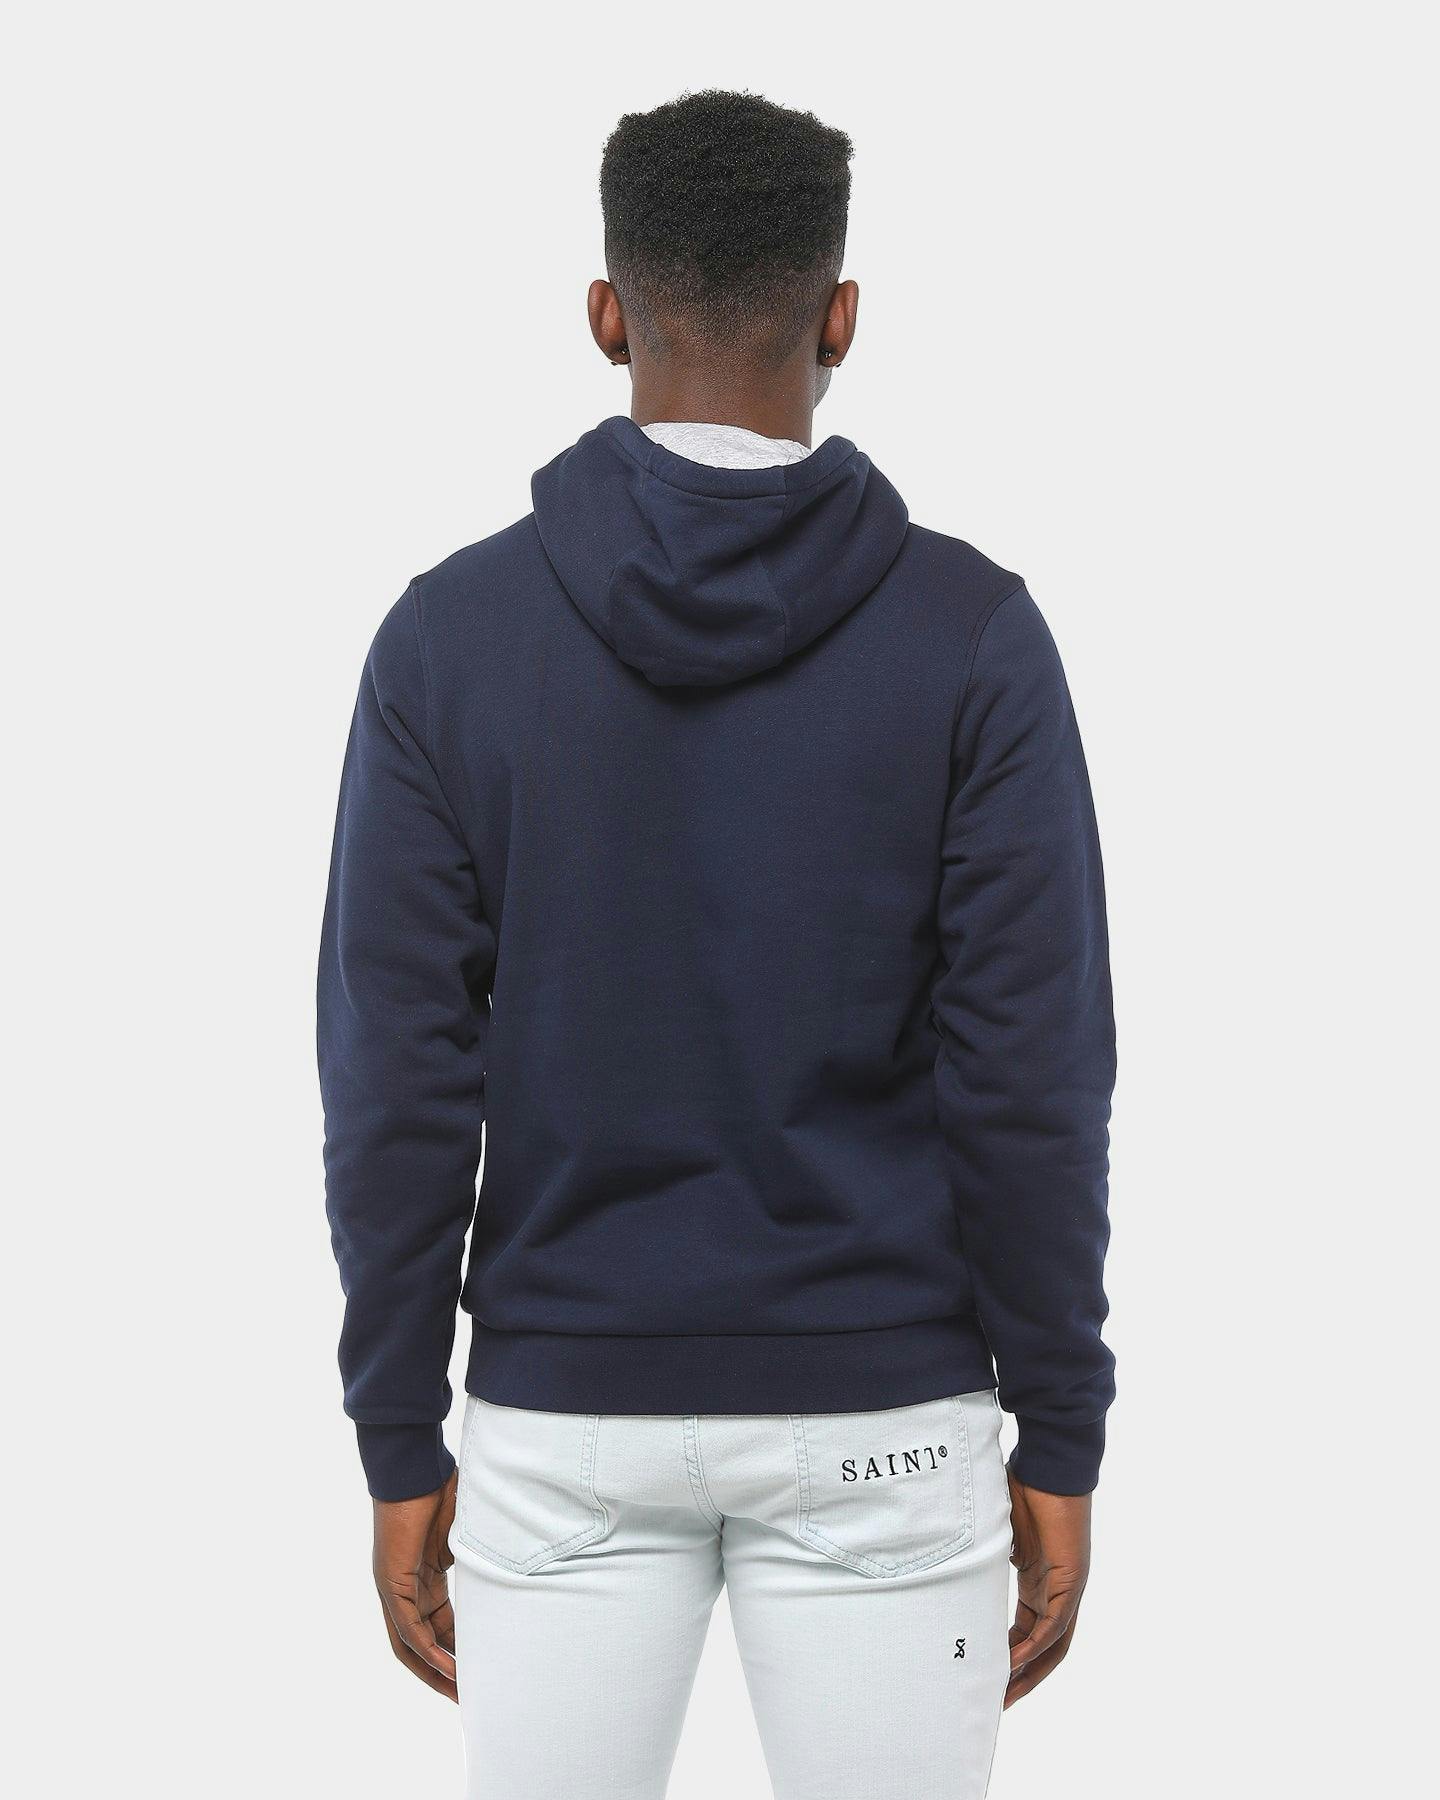 Lacoste Hooded Pullover Navy/Silver | Culture Kings